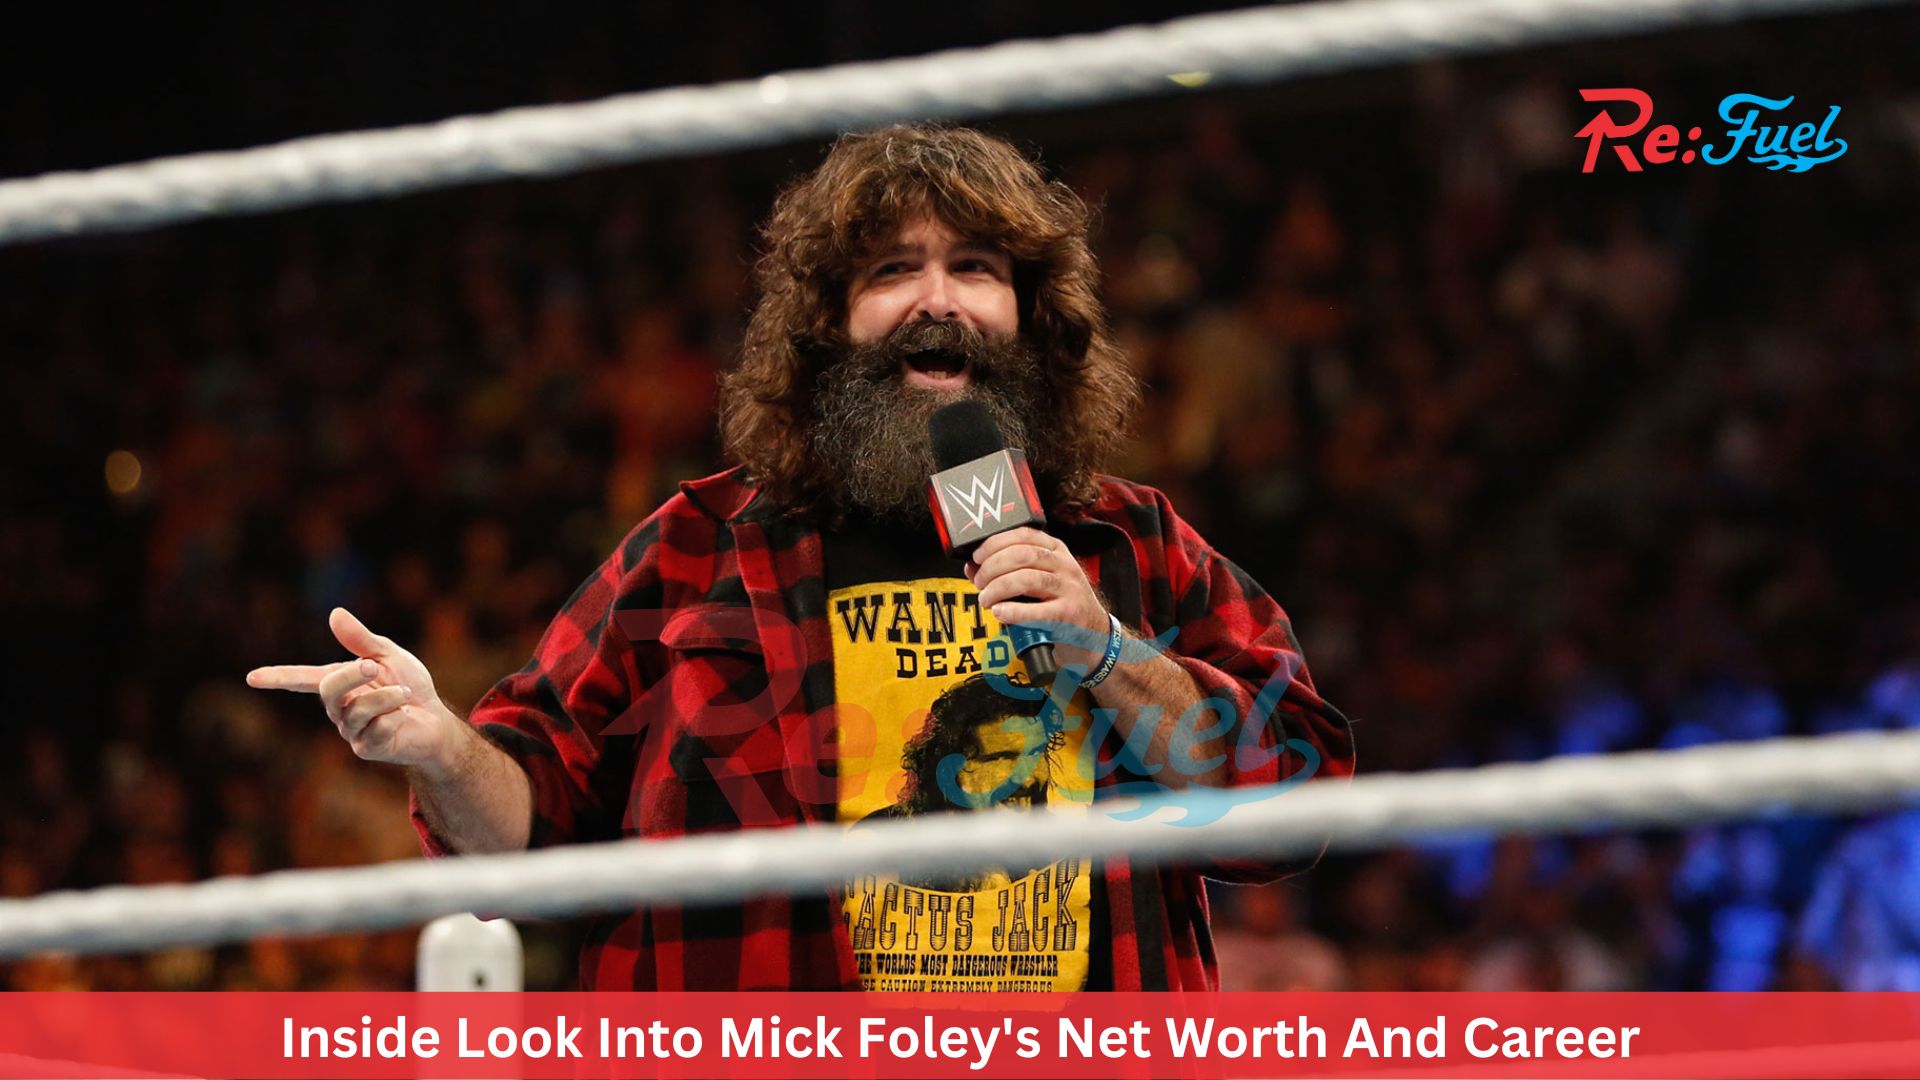 Inside Look Into Mick Foley's Net Worth And Career